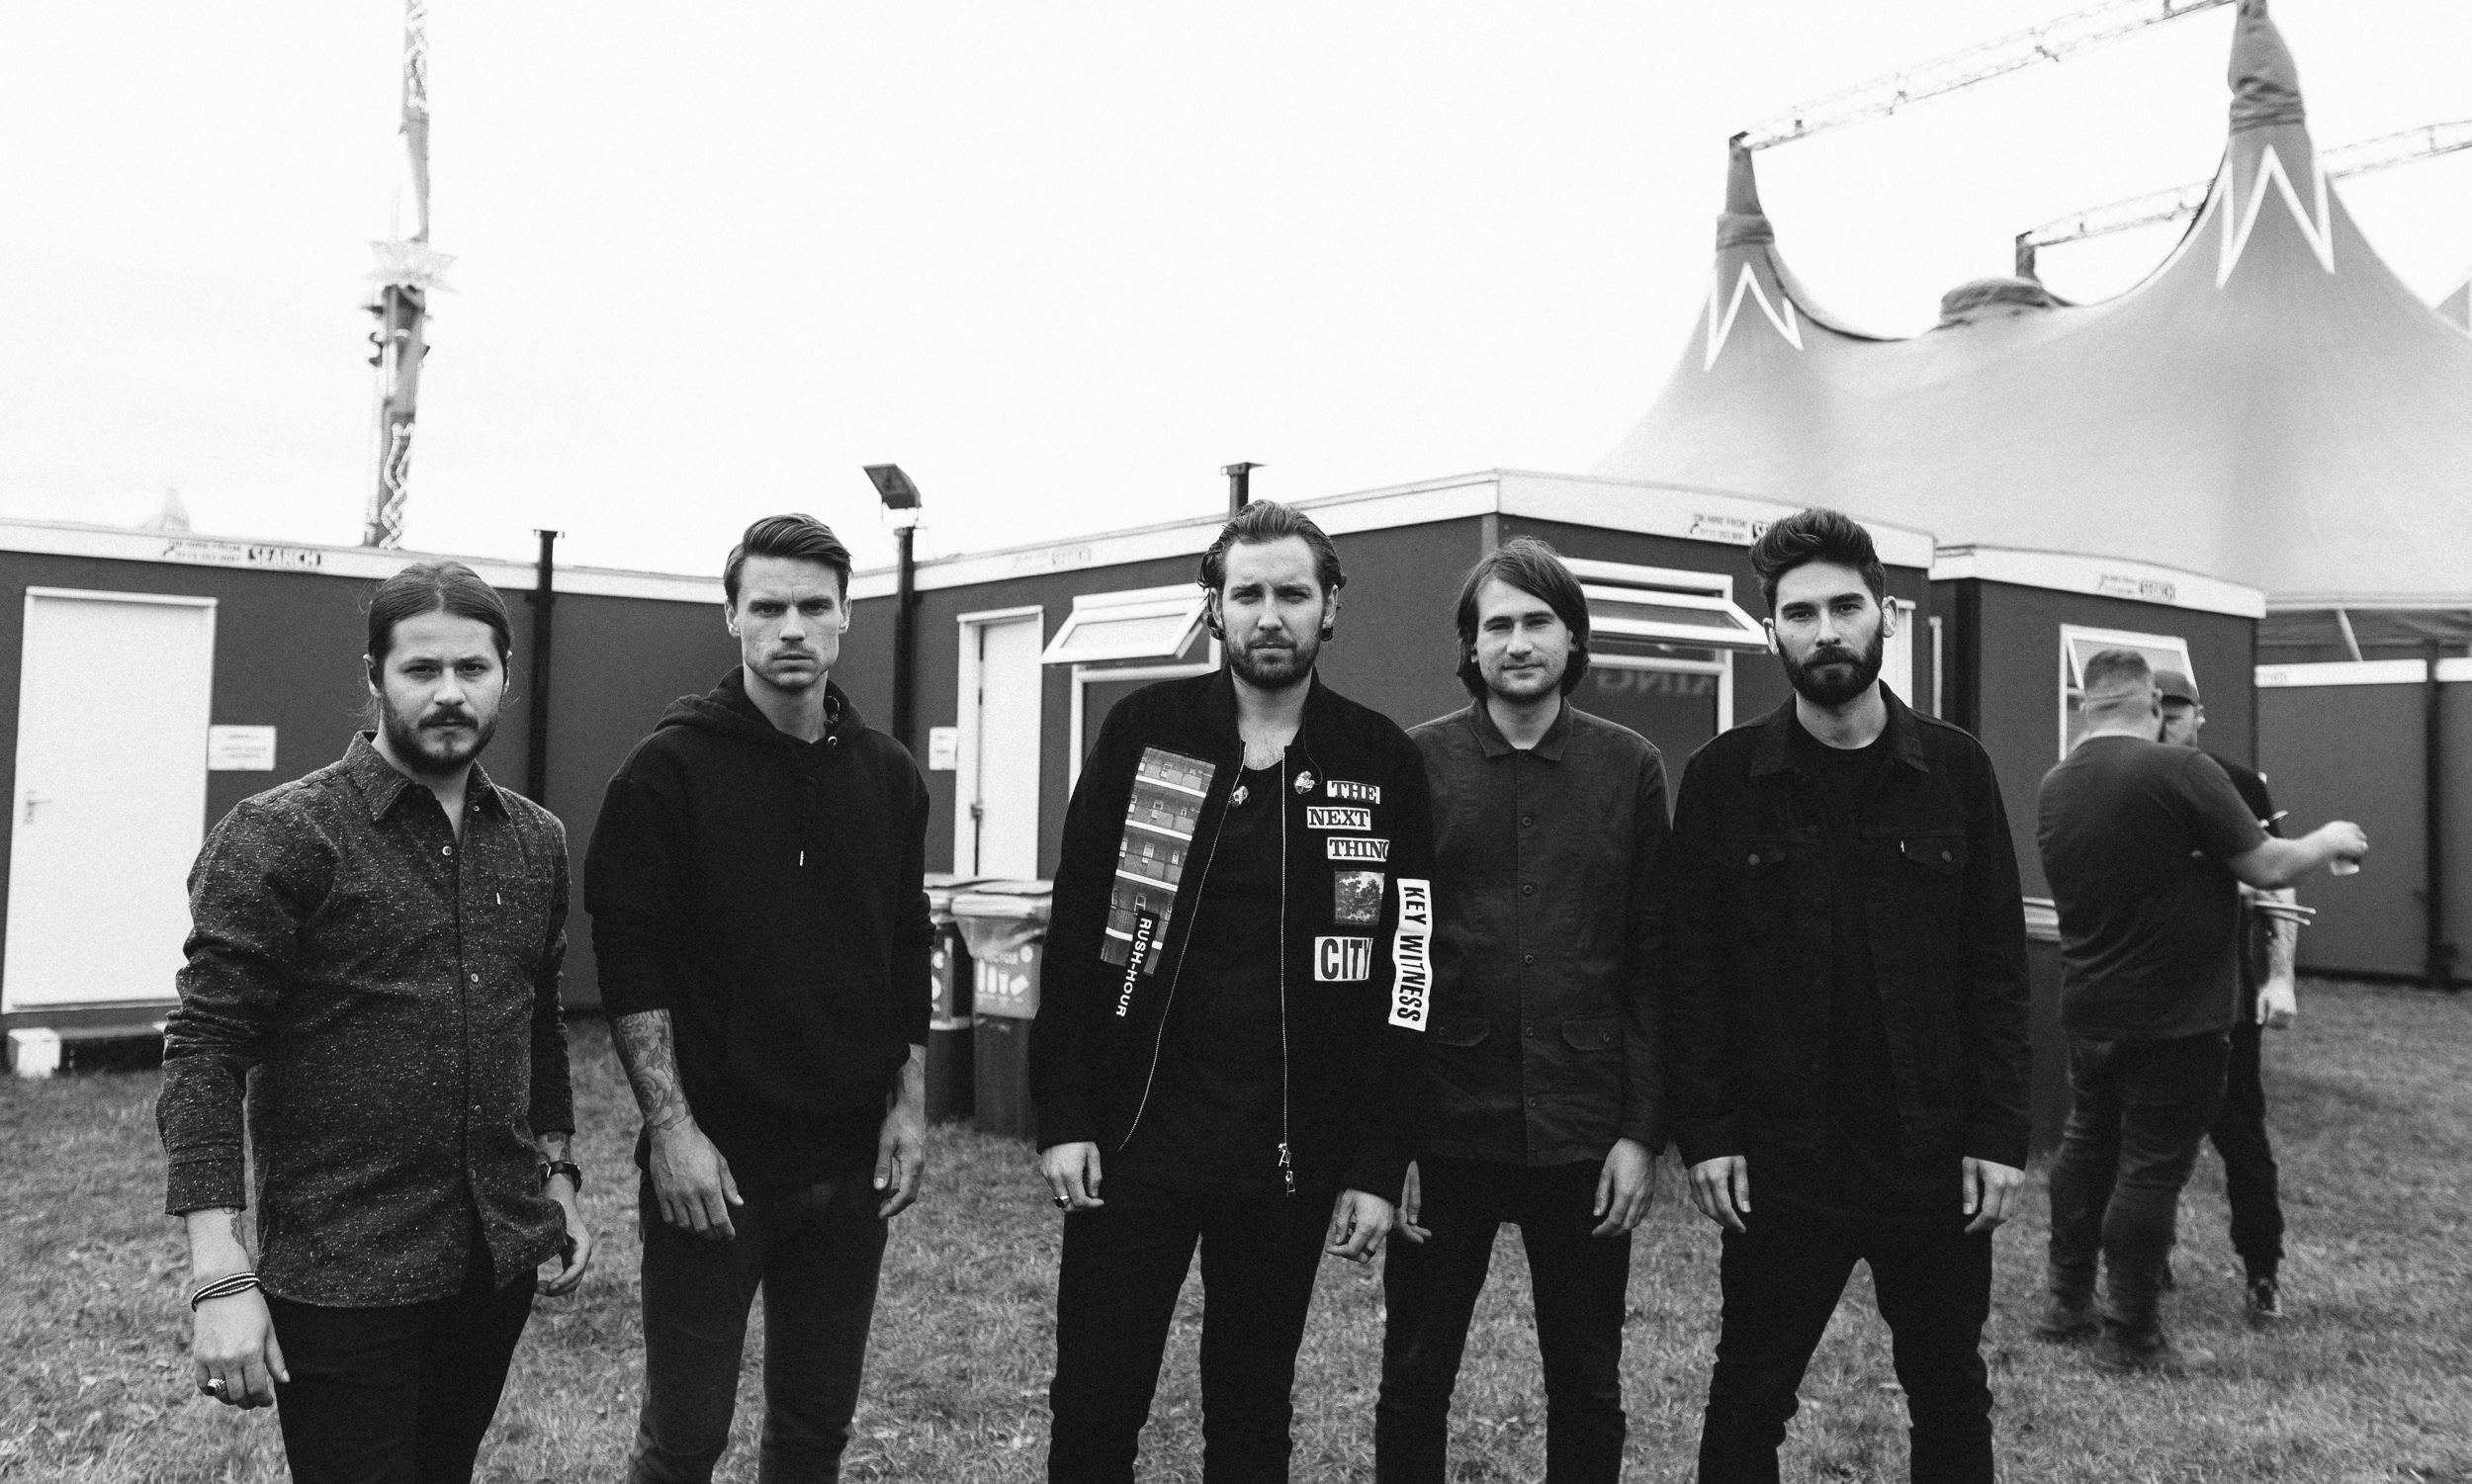 You Me At Six at Leeds Festival by Adam Elmakias